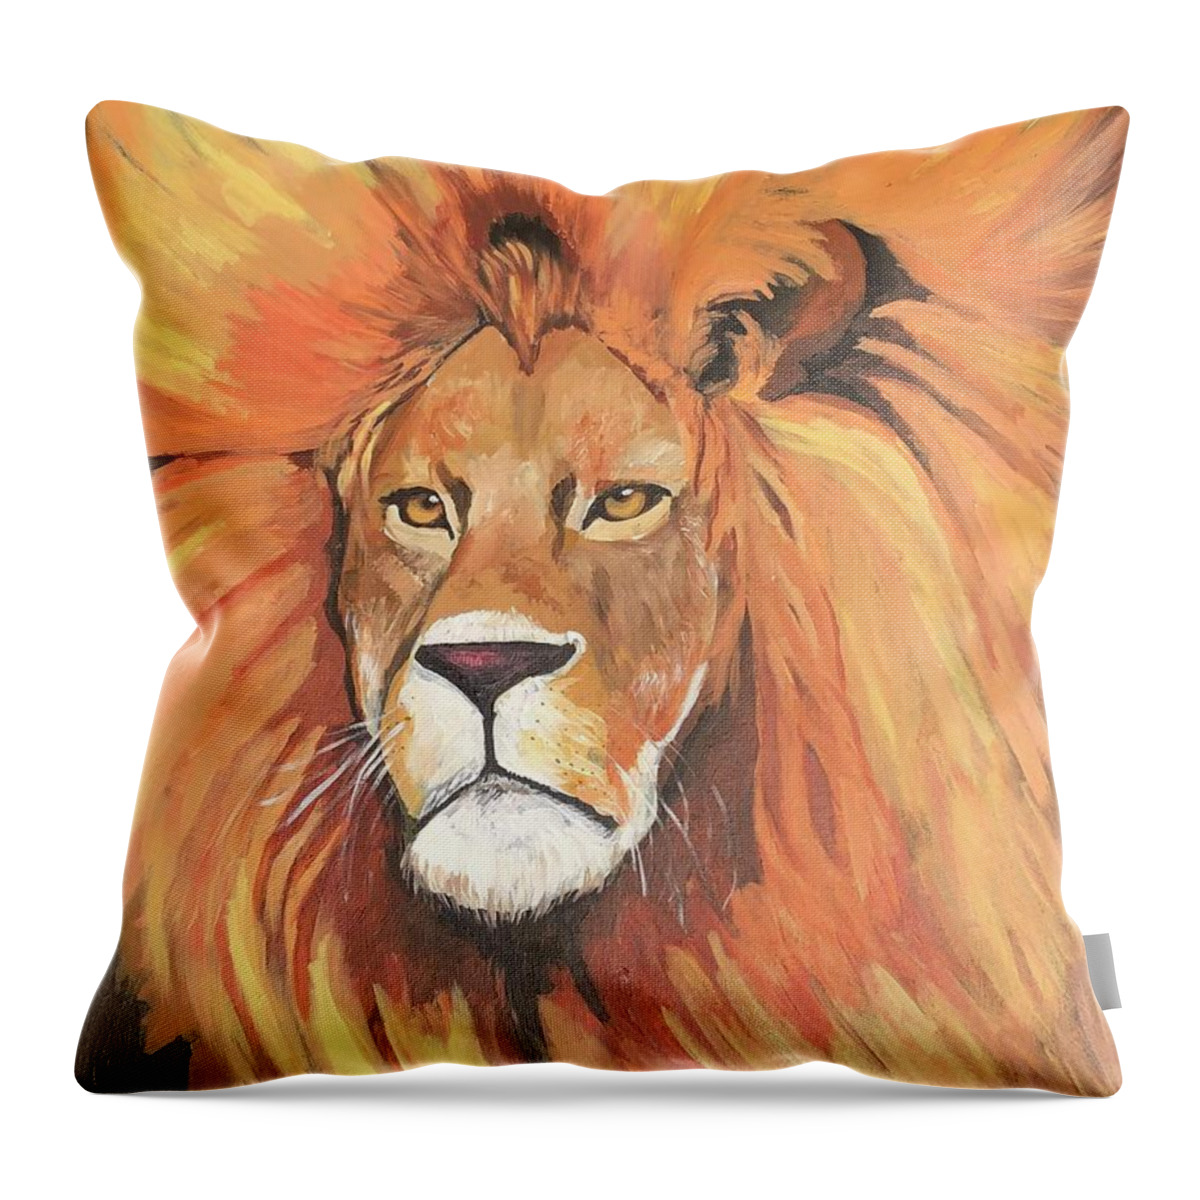  Throw Pillow featuring the painting Lion by Jam Art